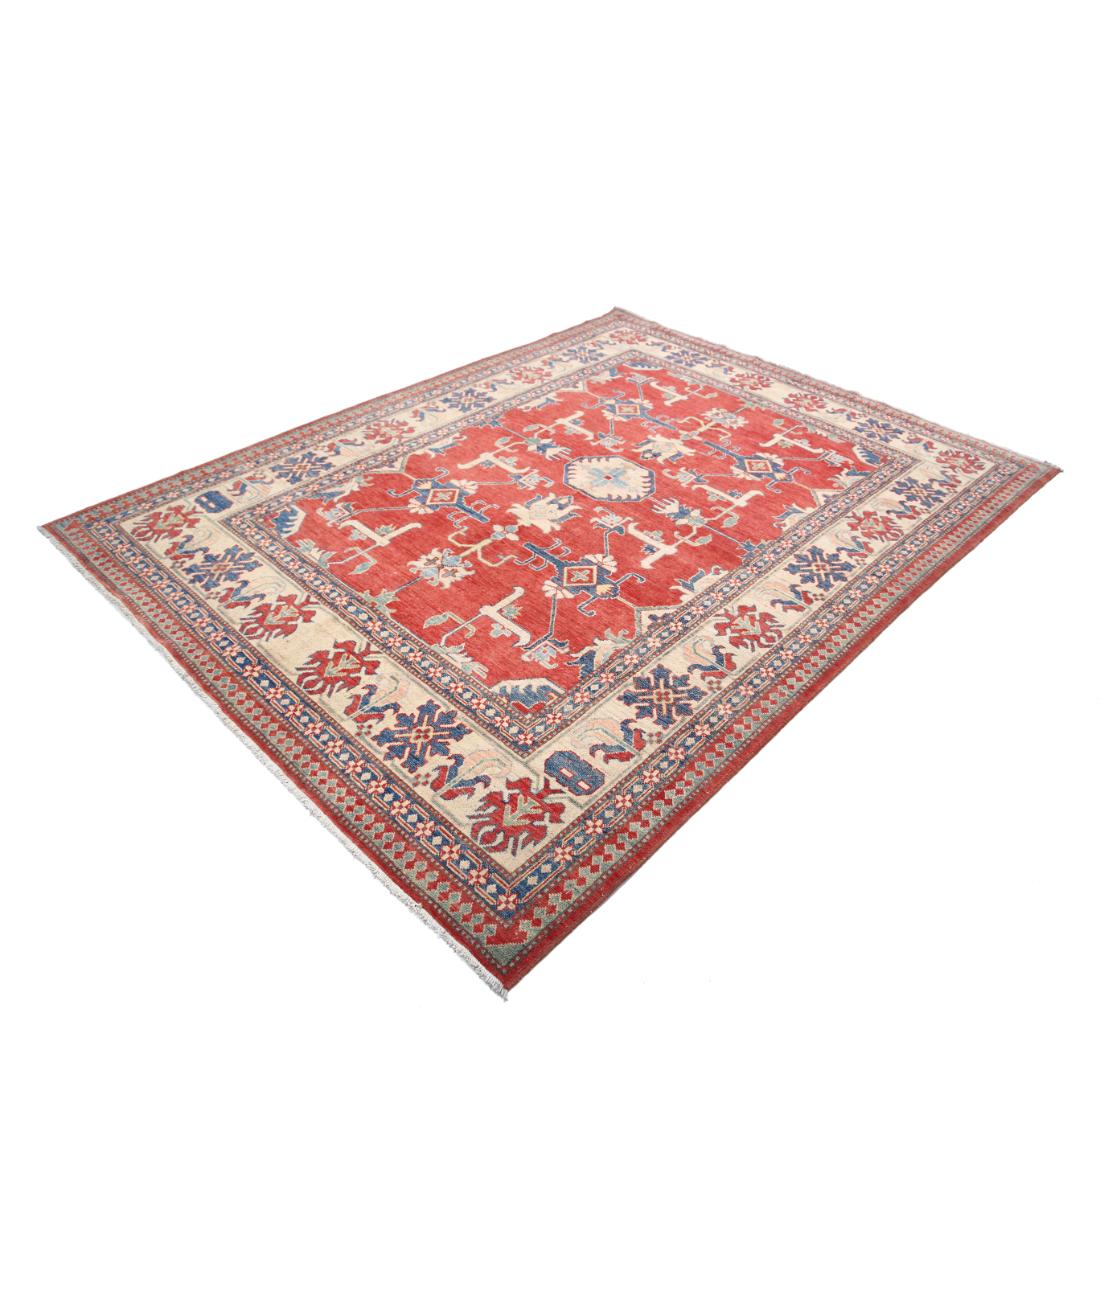 Hand Knotted Tribal Kazak Wool Rug - 6'9'' x 8'9'' 6' 9" X 8' 9" (206 X 267) / Red / Ivory